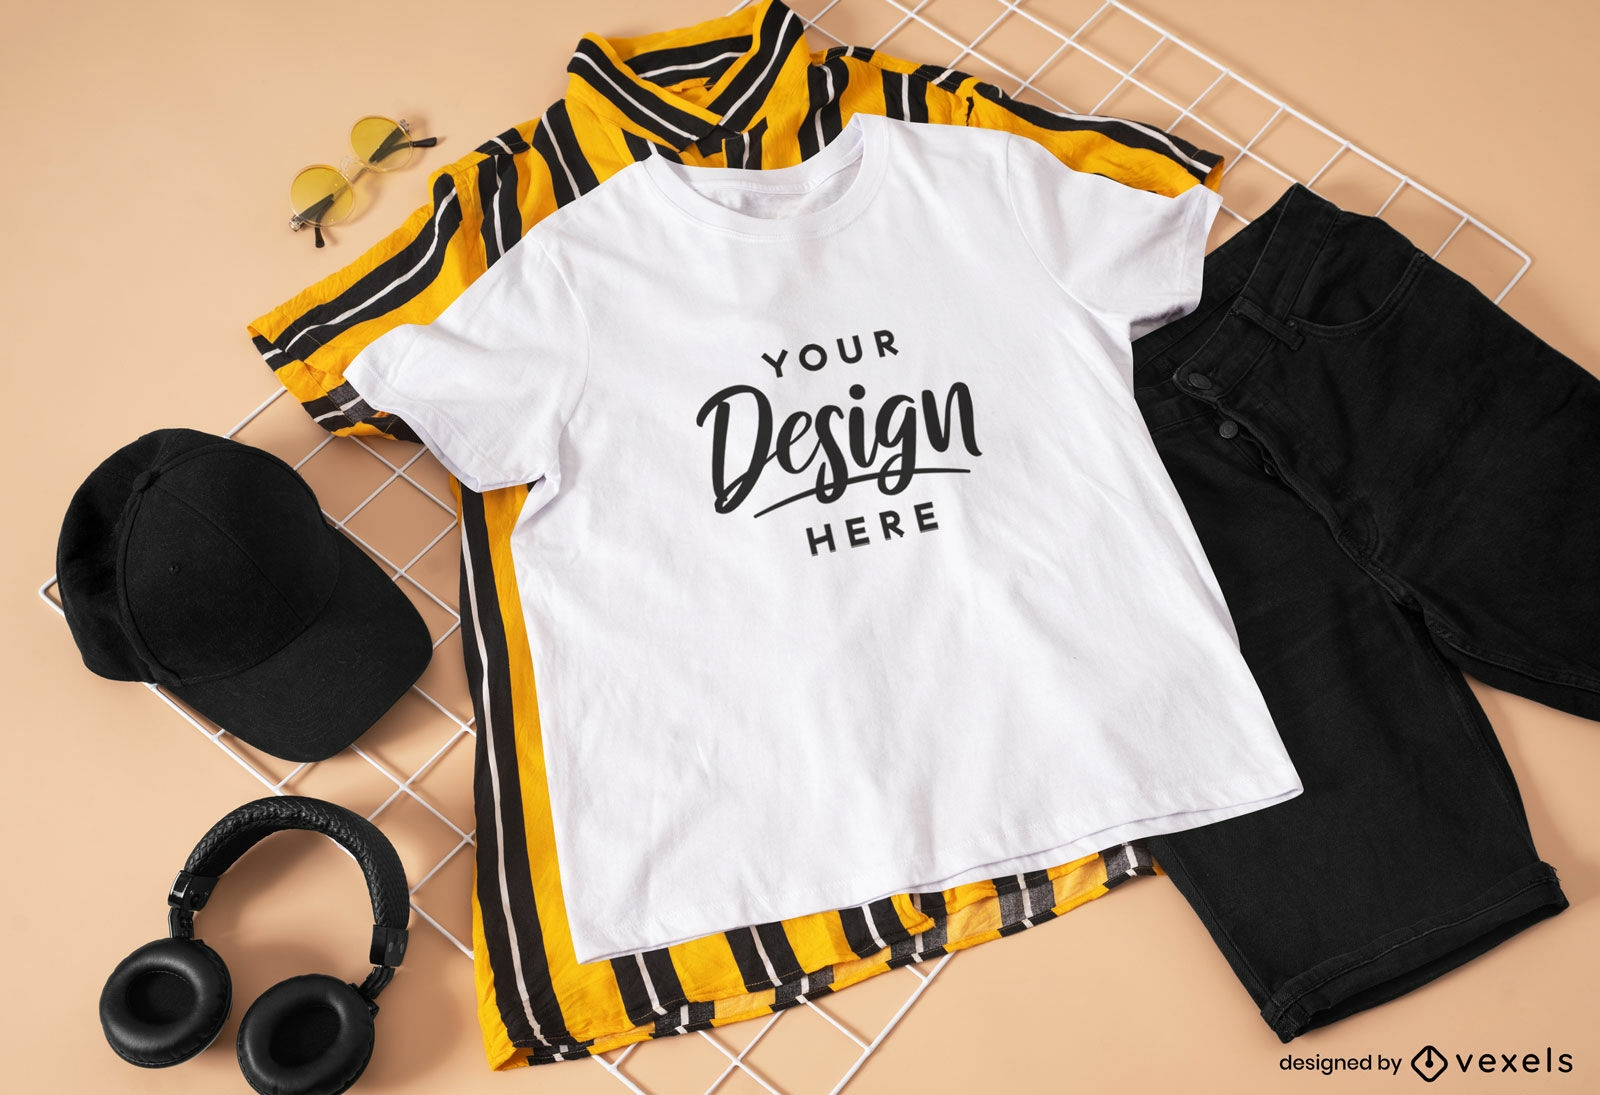 Men's outfit with striped button up t-shirt mockup design